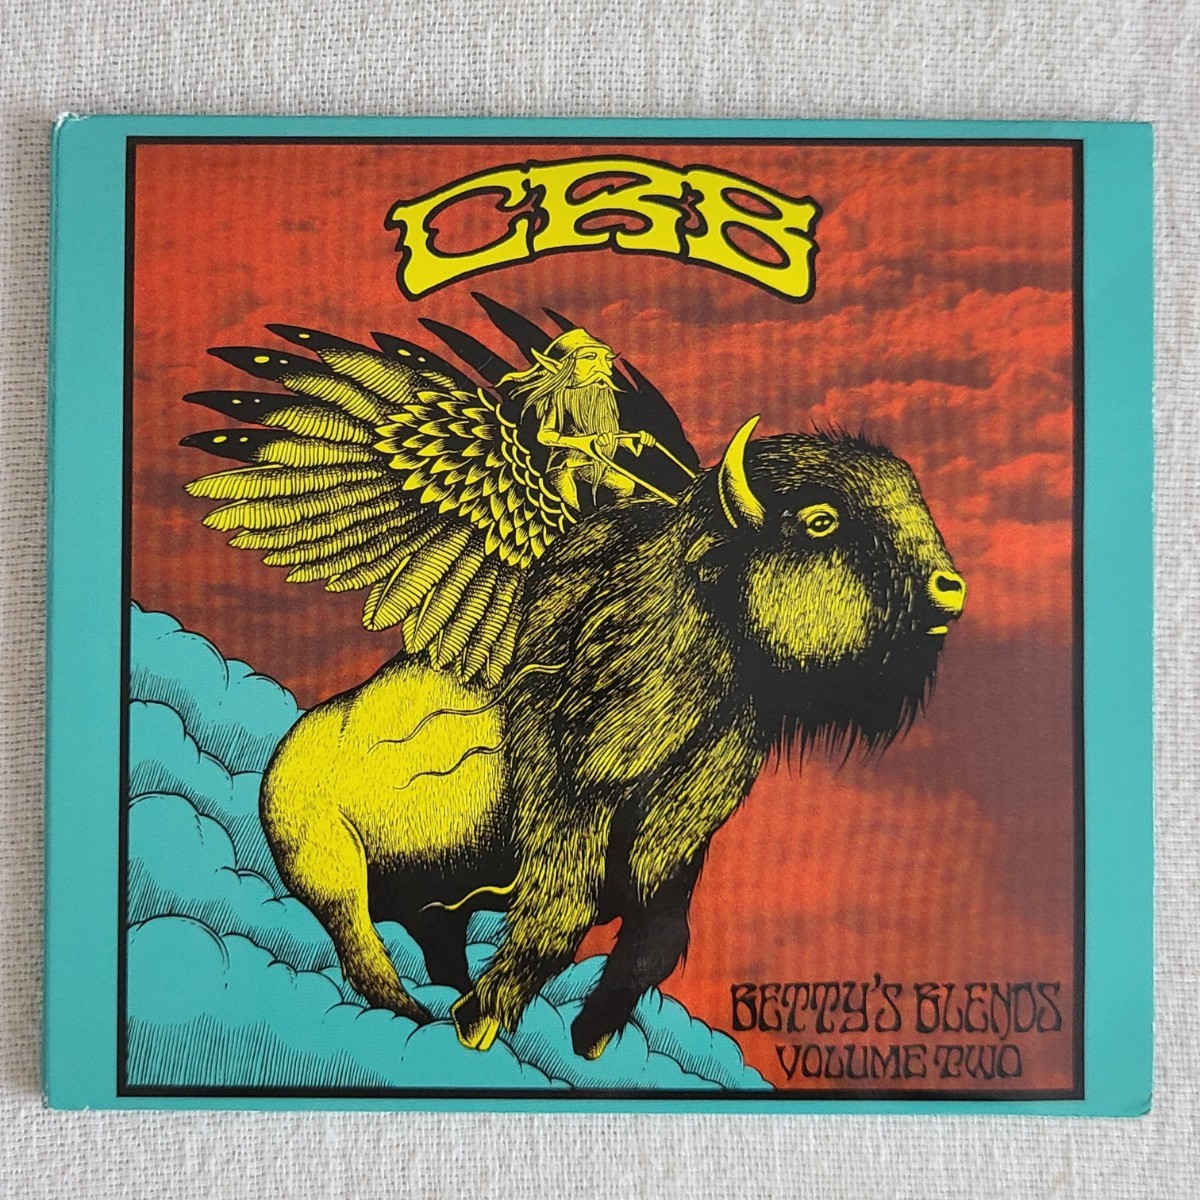 The Chris Robinson Brotherhood / Betty's Blends Volume Two【US盤 Limited Edition Digipak CD】The Black Crowes レア・限定盤CD_画像1